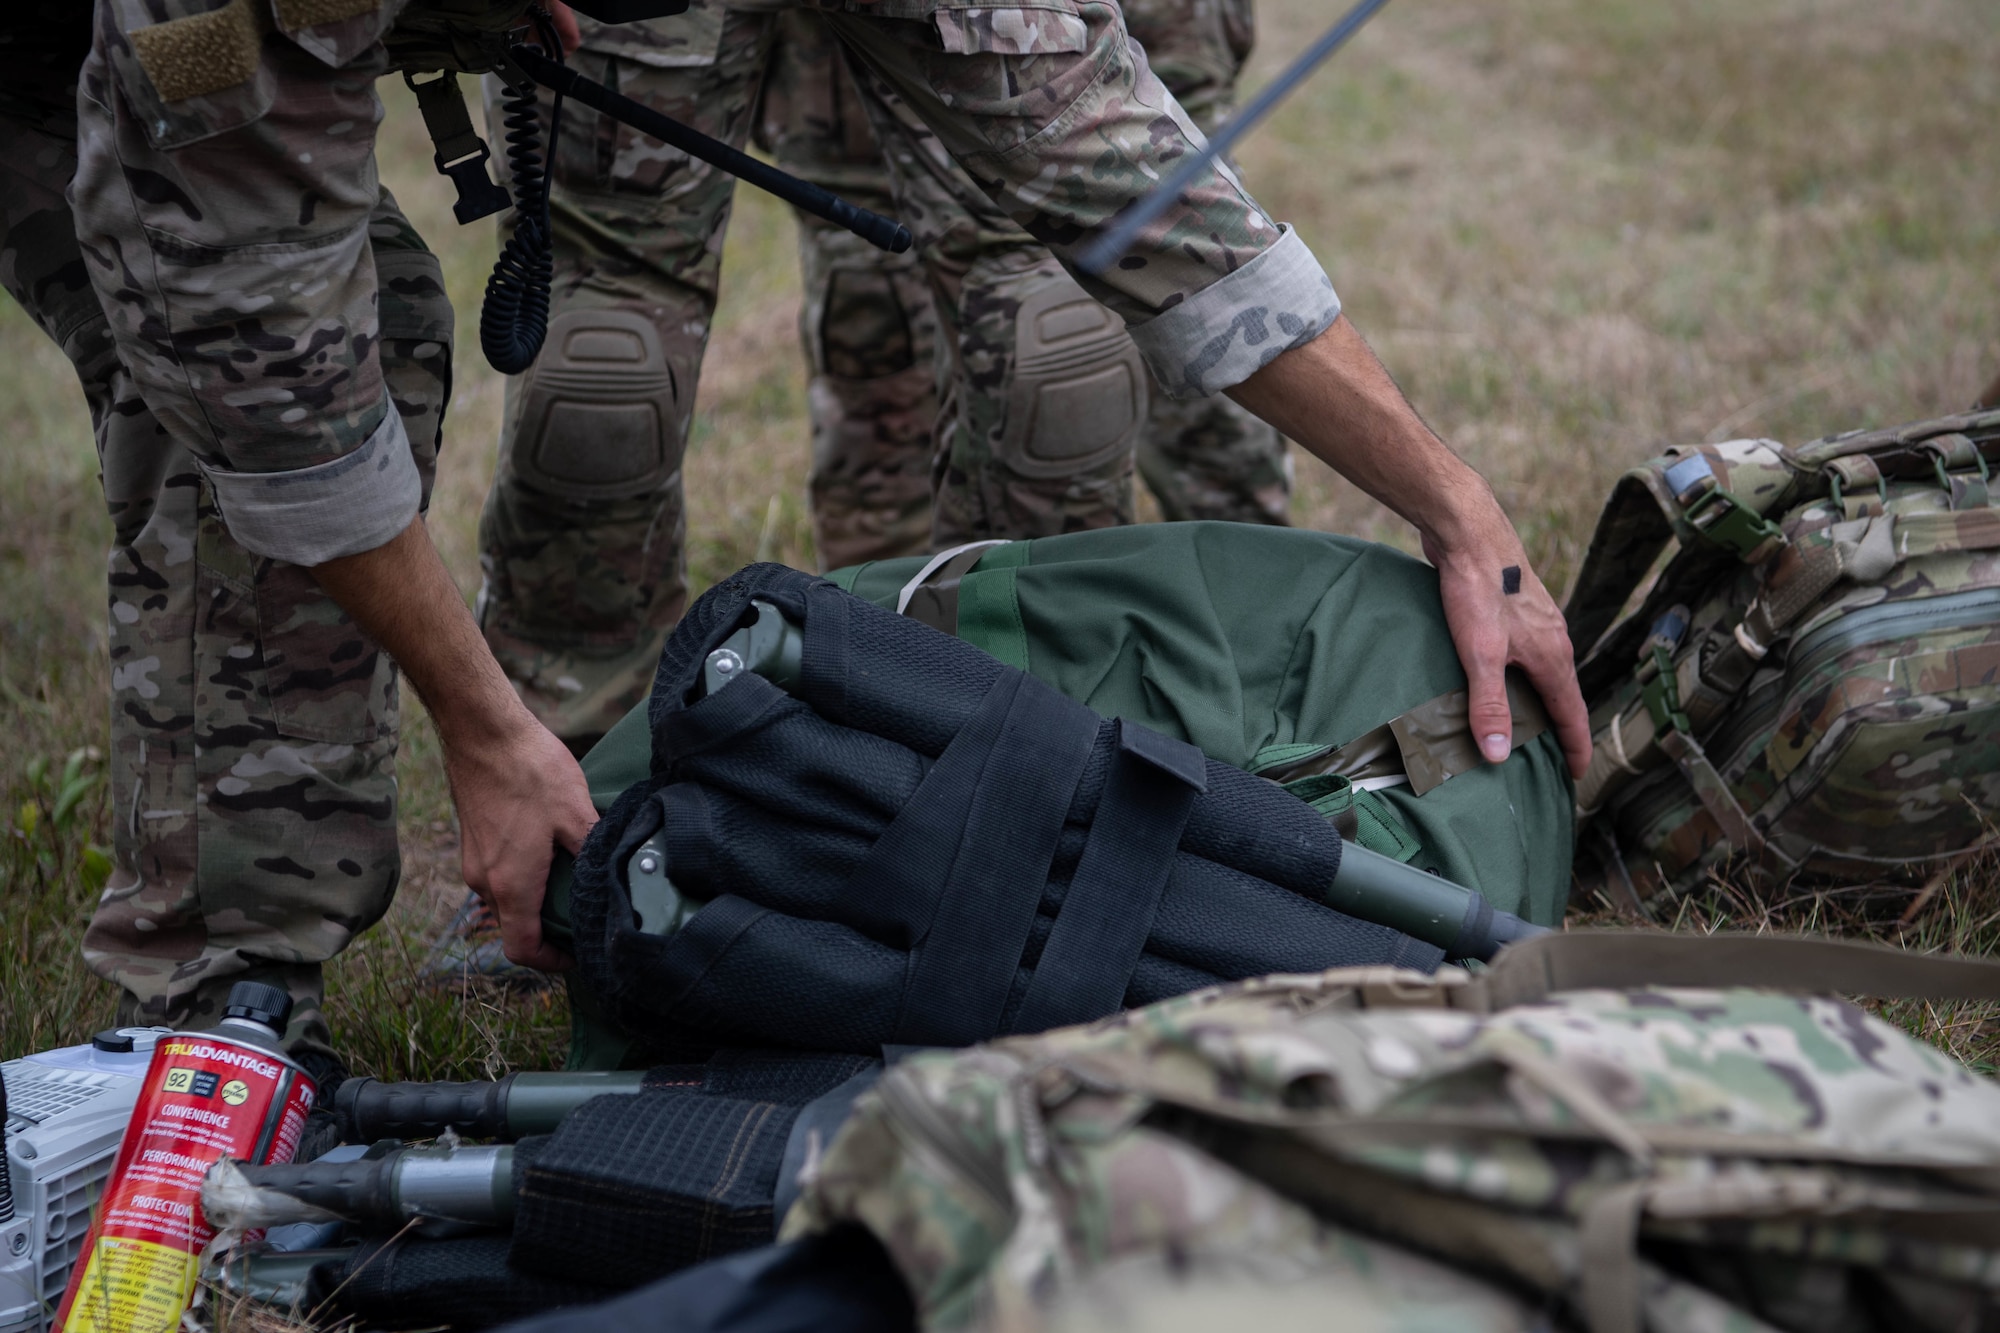 We see the arms of a Special Tactics operator on the left as he reaches down to pick up a folded-up dark green stretcher from a pile of equipment. We see the legs of another operator as he stands behind the operator reaching for the stretcher.